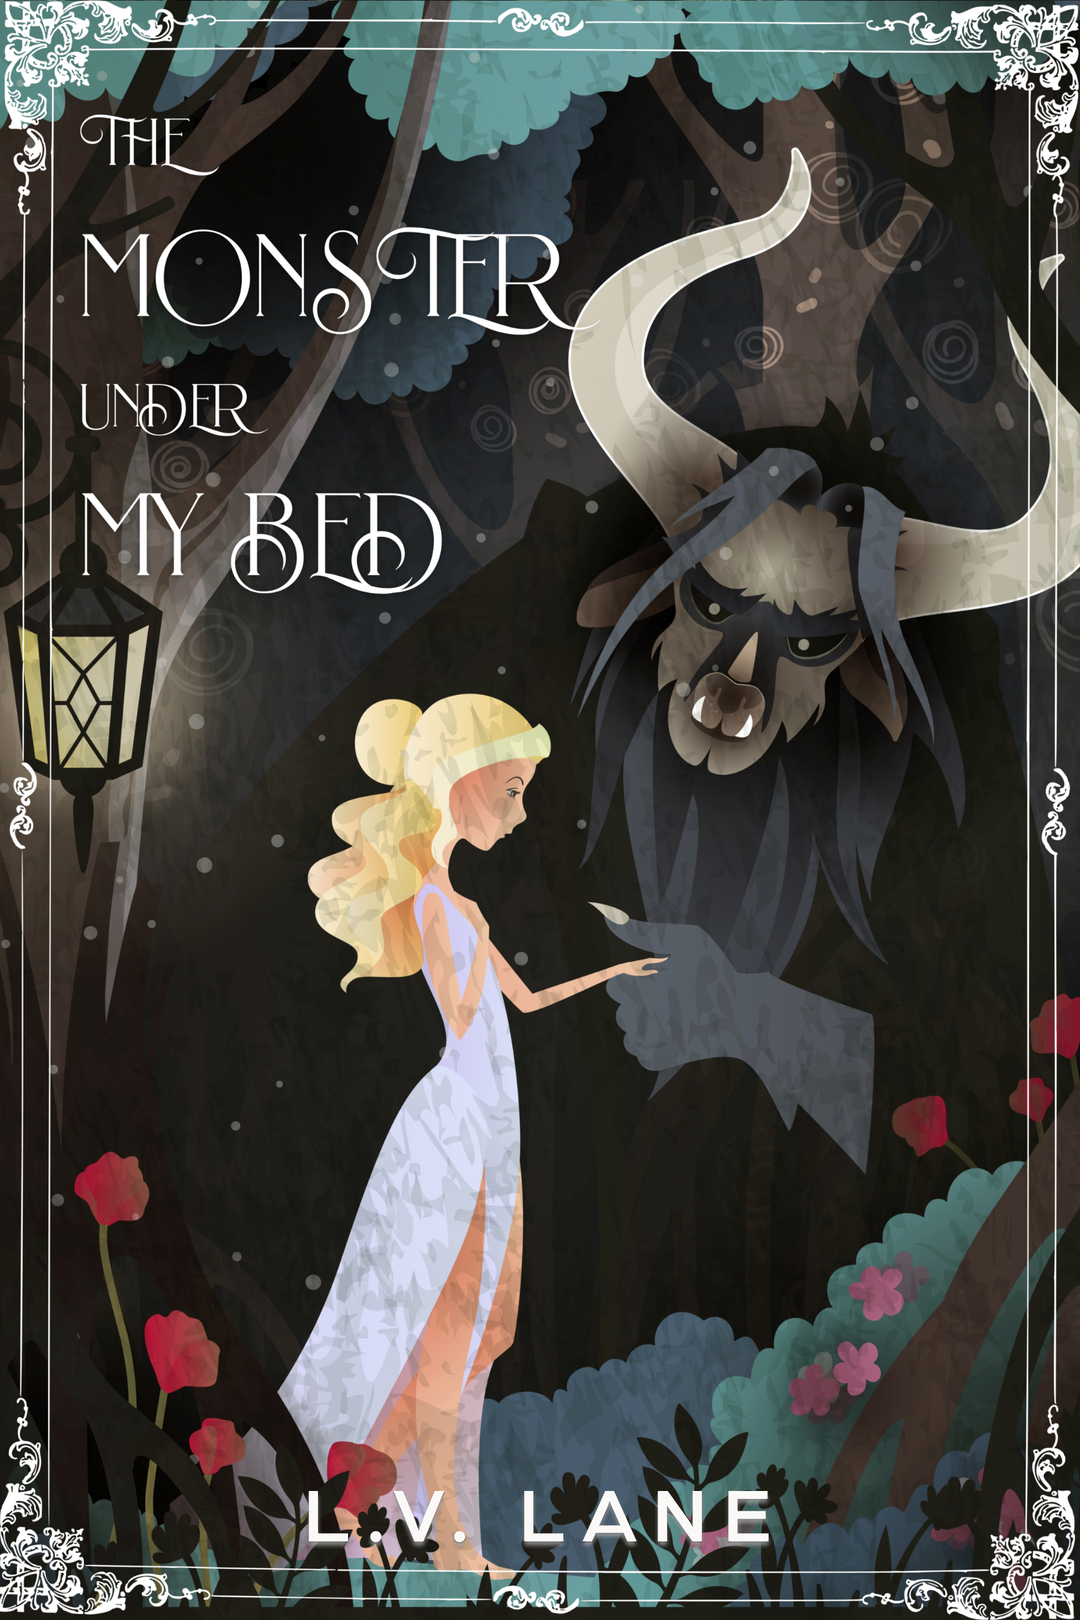 The Monster Under My Bed by L.V. Lane